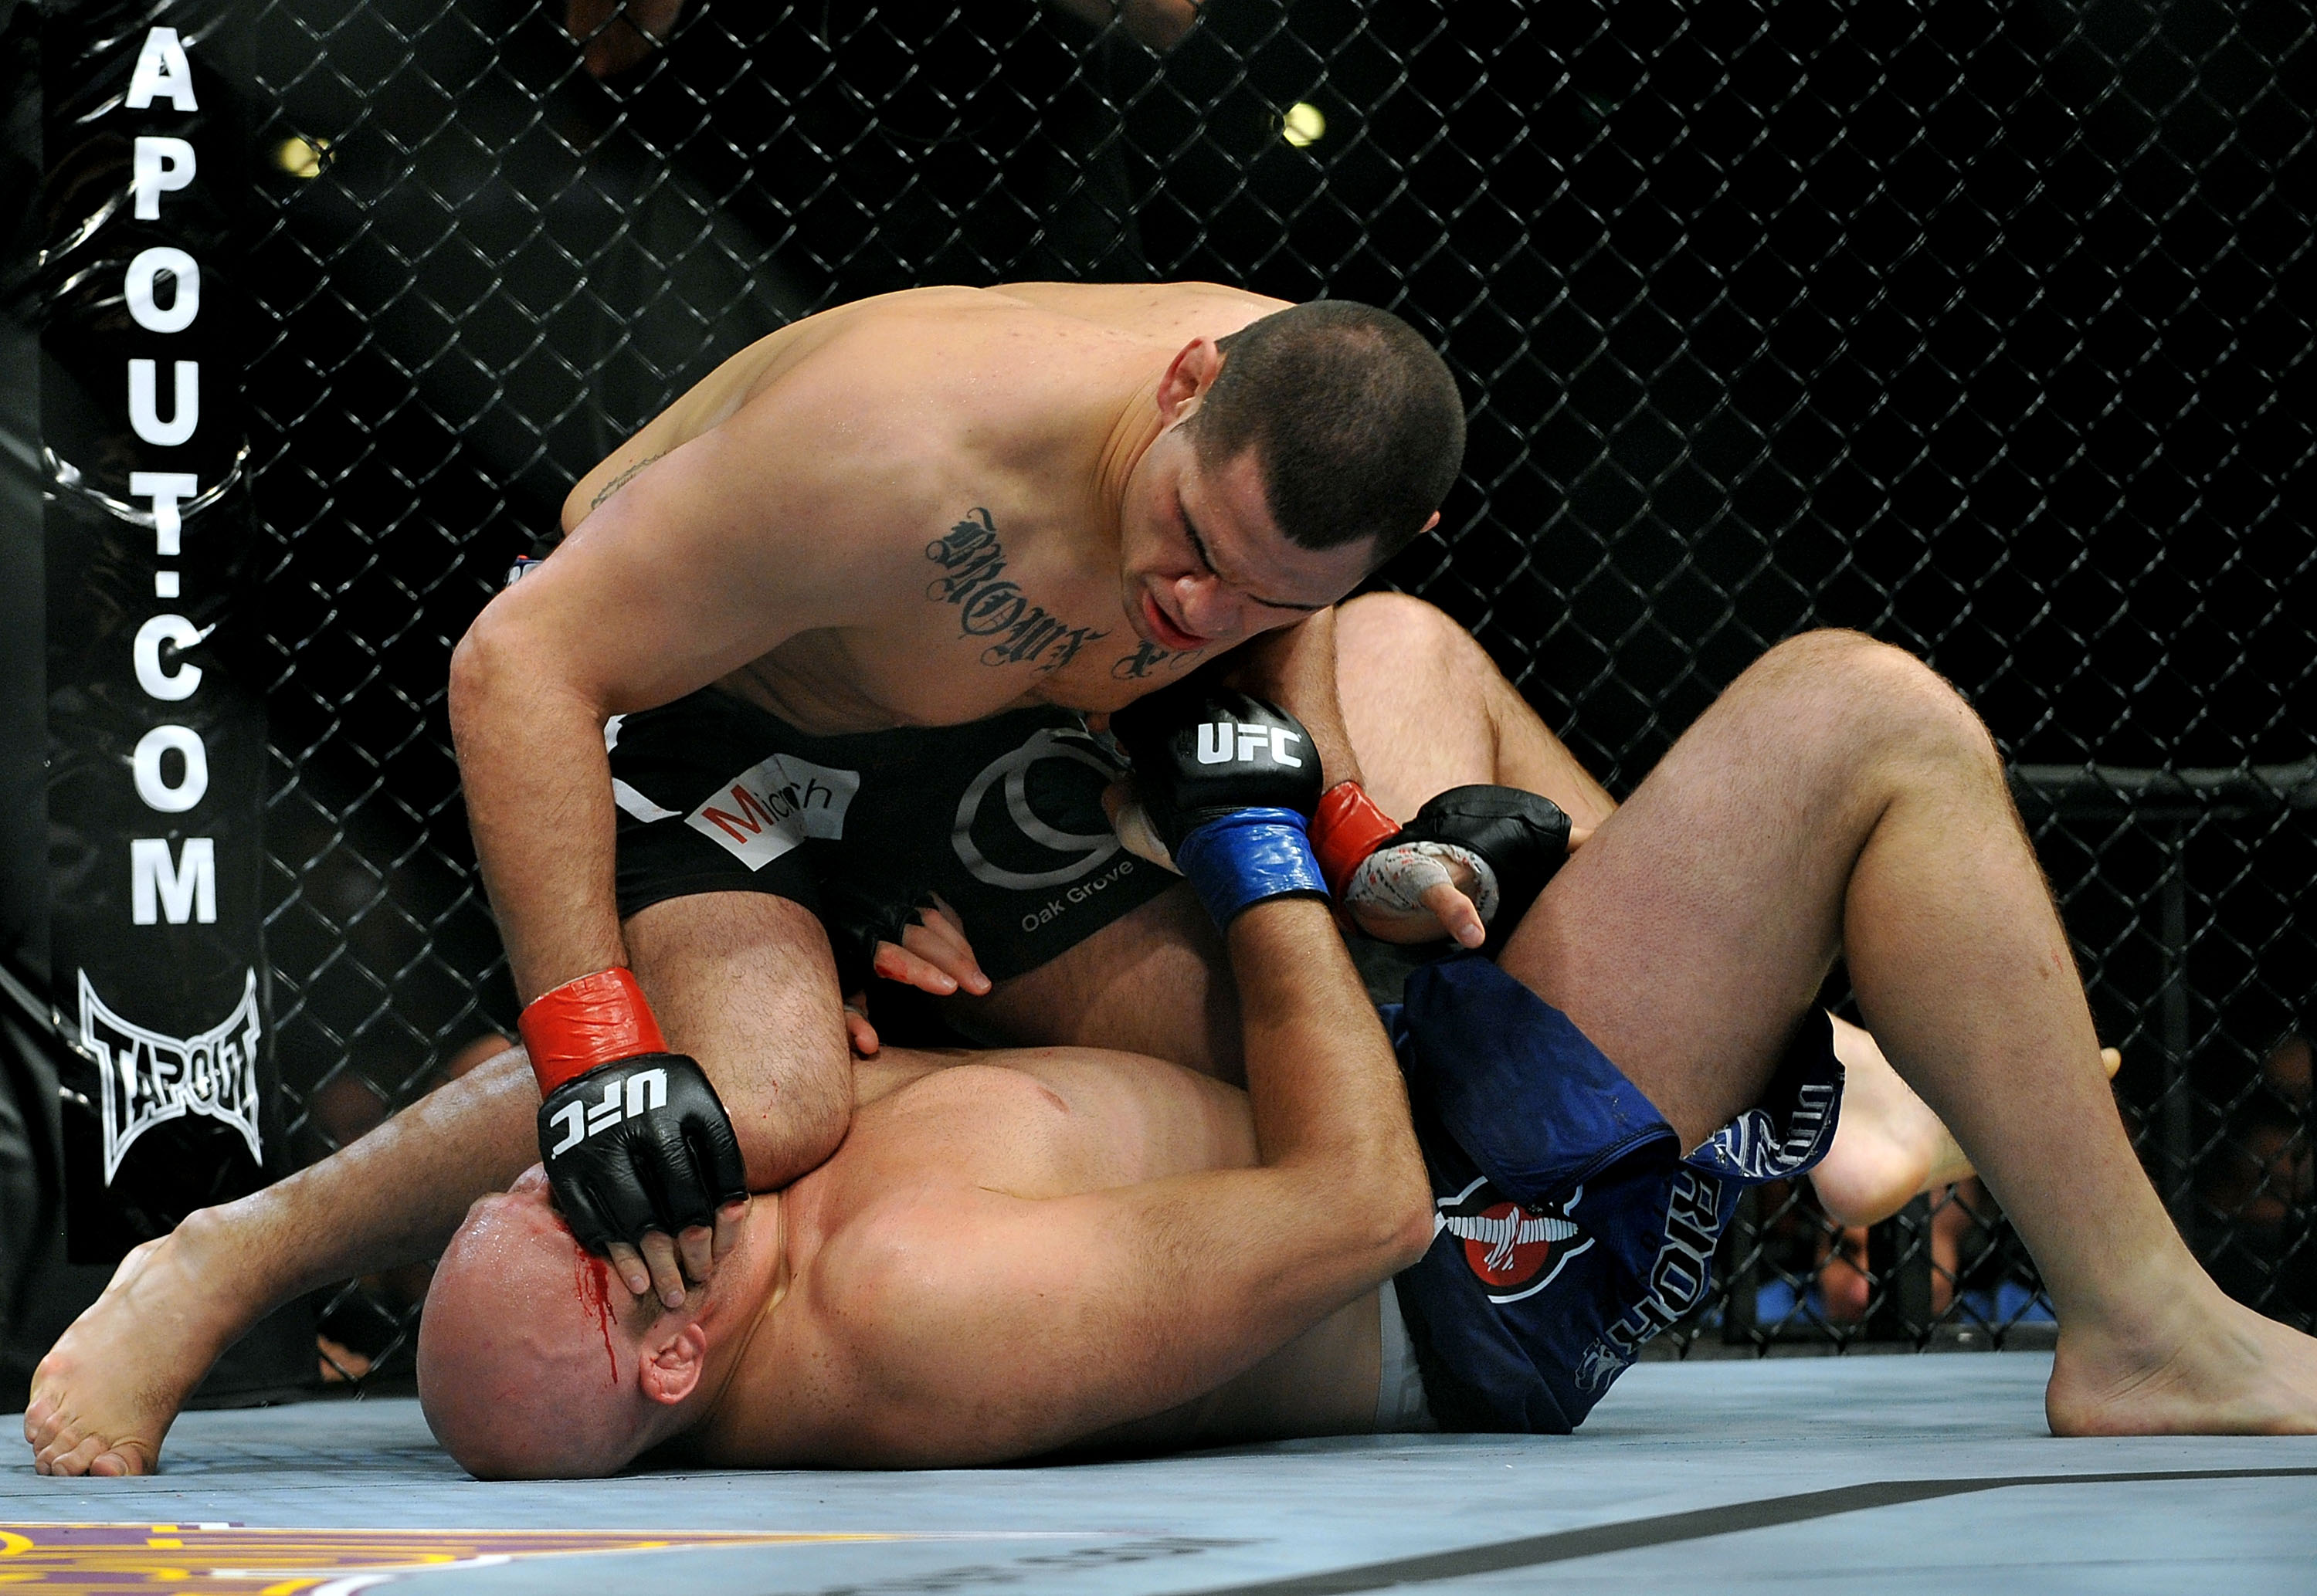 LOS ANGELES, CA - OCTOBER 24:  UFC fighter Cain Velasquez (top) battles with UFC fighter Ben Rothwell (bottom) during their Heavyweight bout at UFC 104: Machida vs. Shogun at Staples Center on October 24, 2009 in Los Angeles, California.  (Photo by Jon Ko